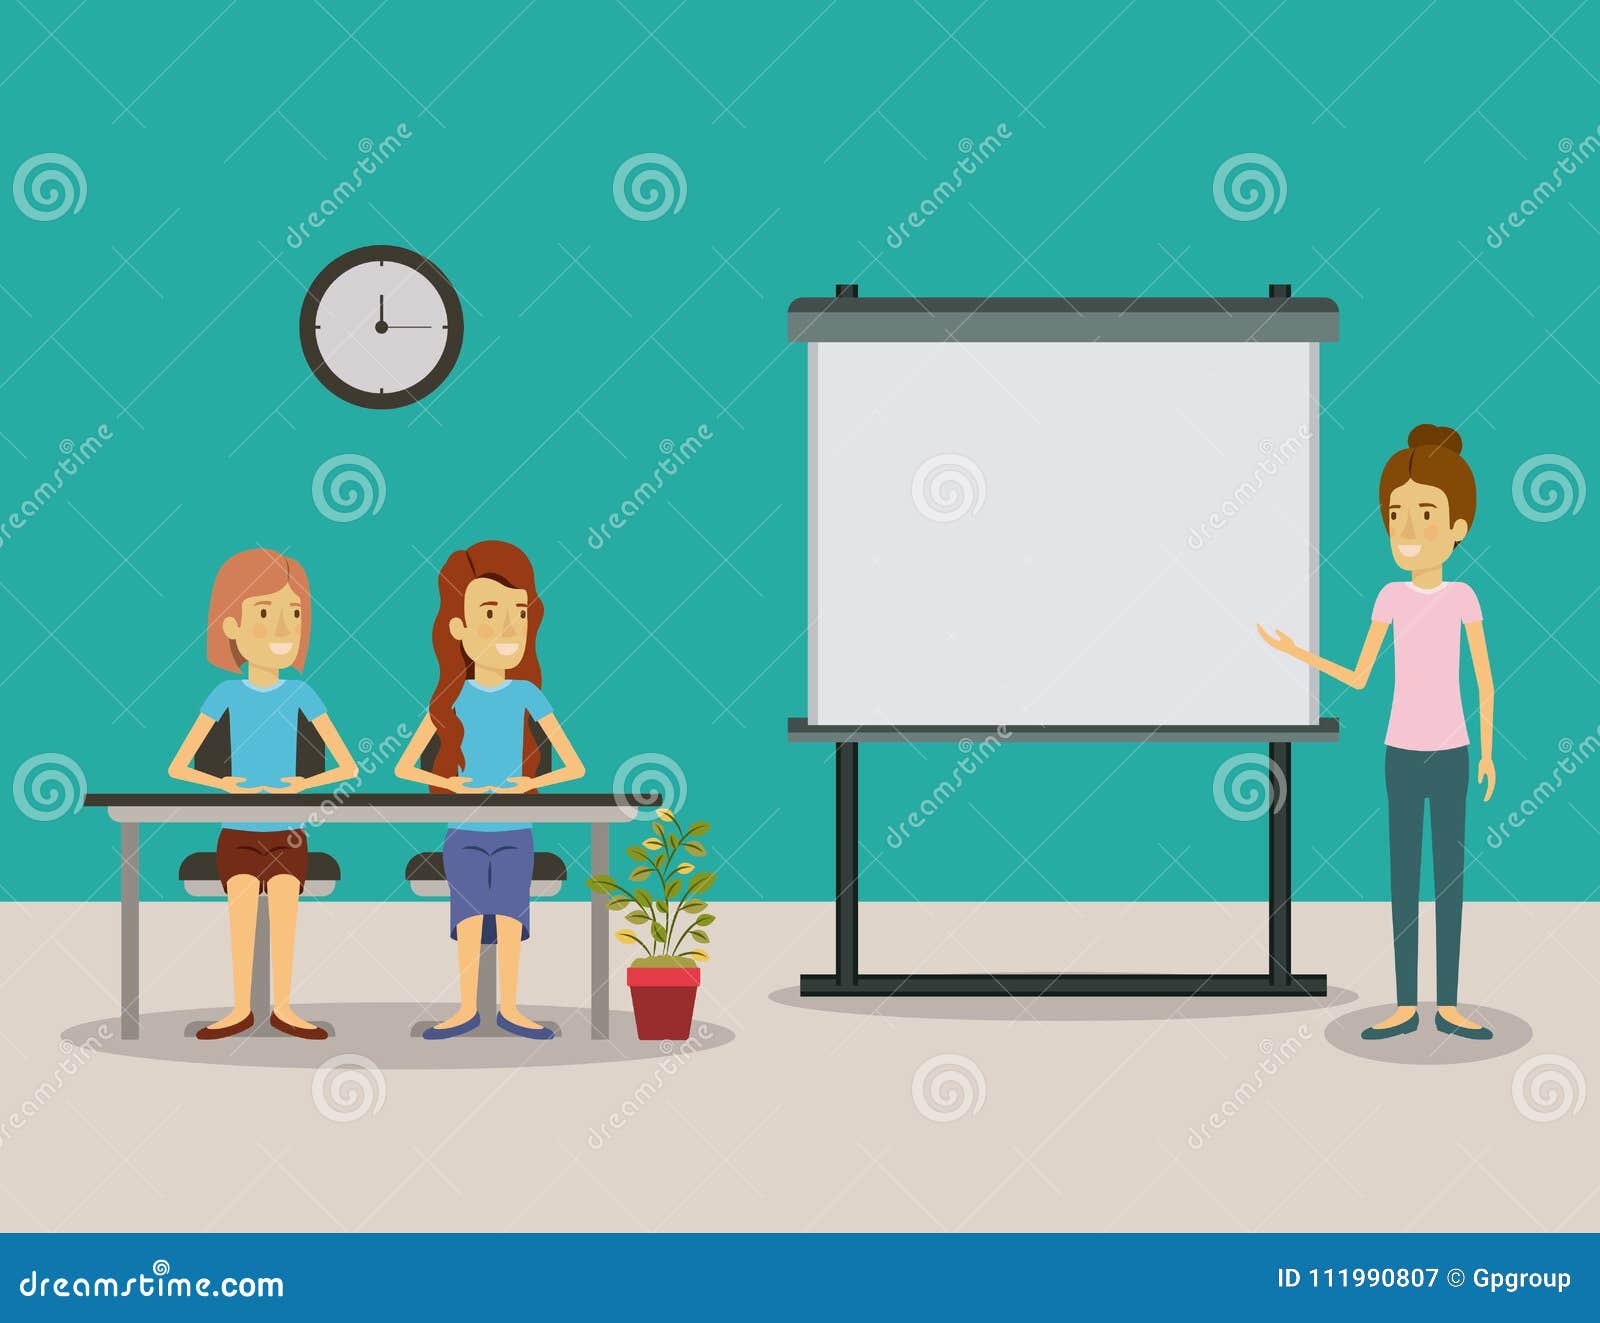 color background couple of women sitting in a desk for female executive in presentacion business people